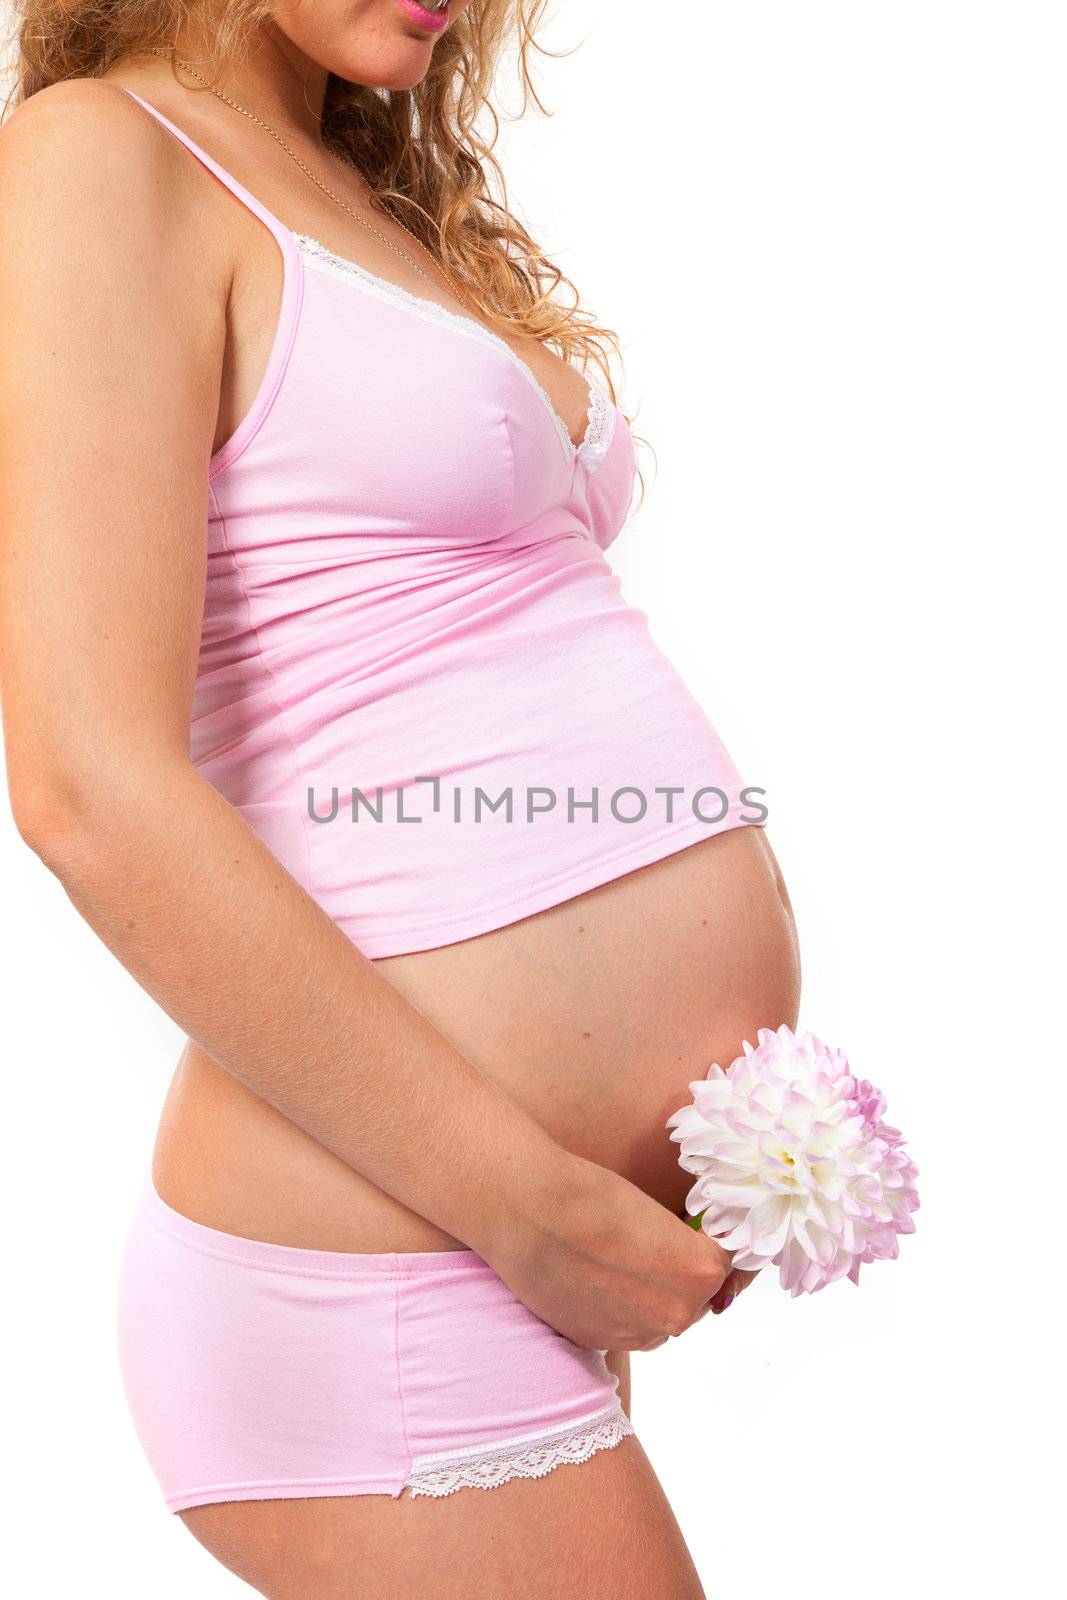 Pregnant woman is caressing her belly by bloodua